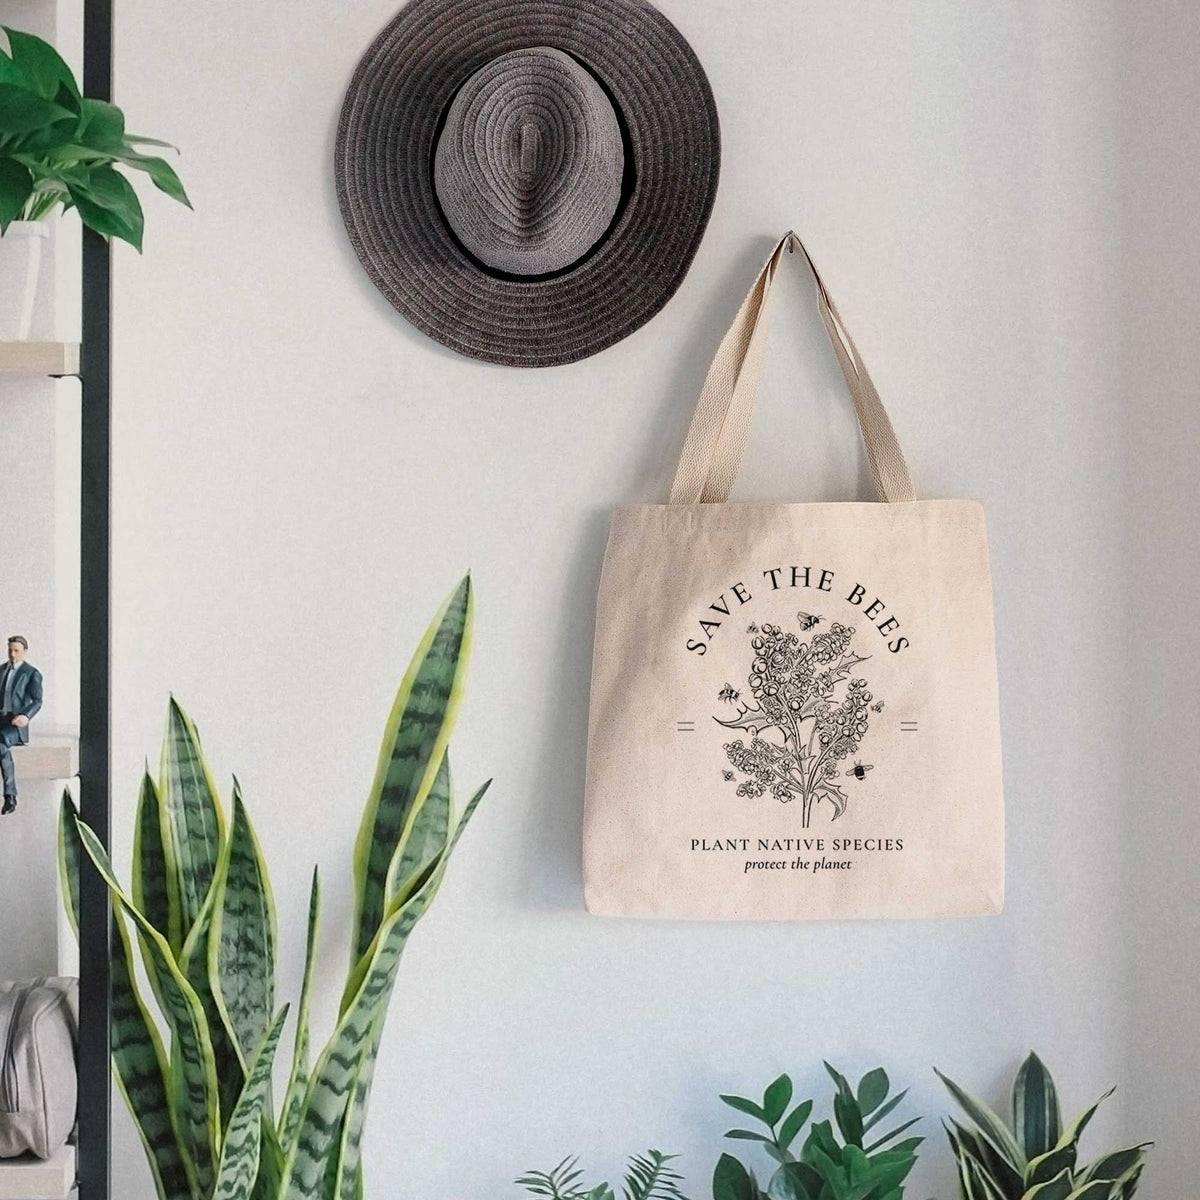 Save the Bees - Plant Native Species - Tote Bag